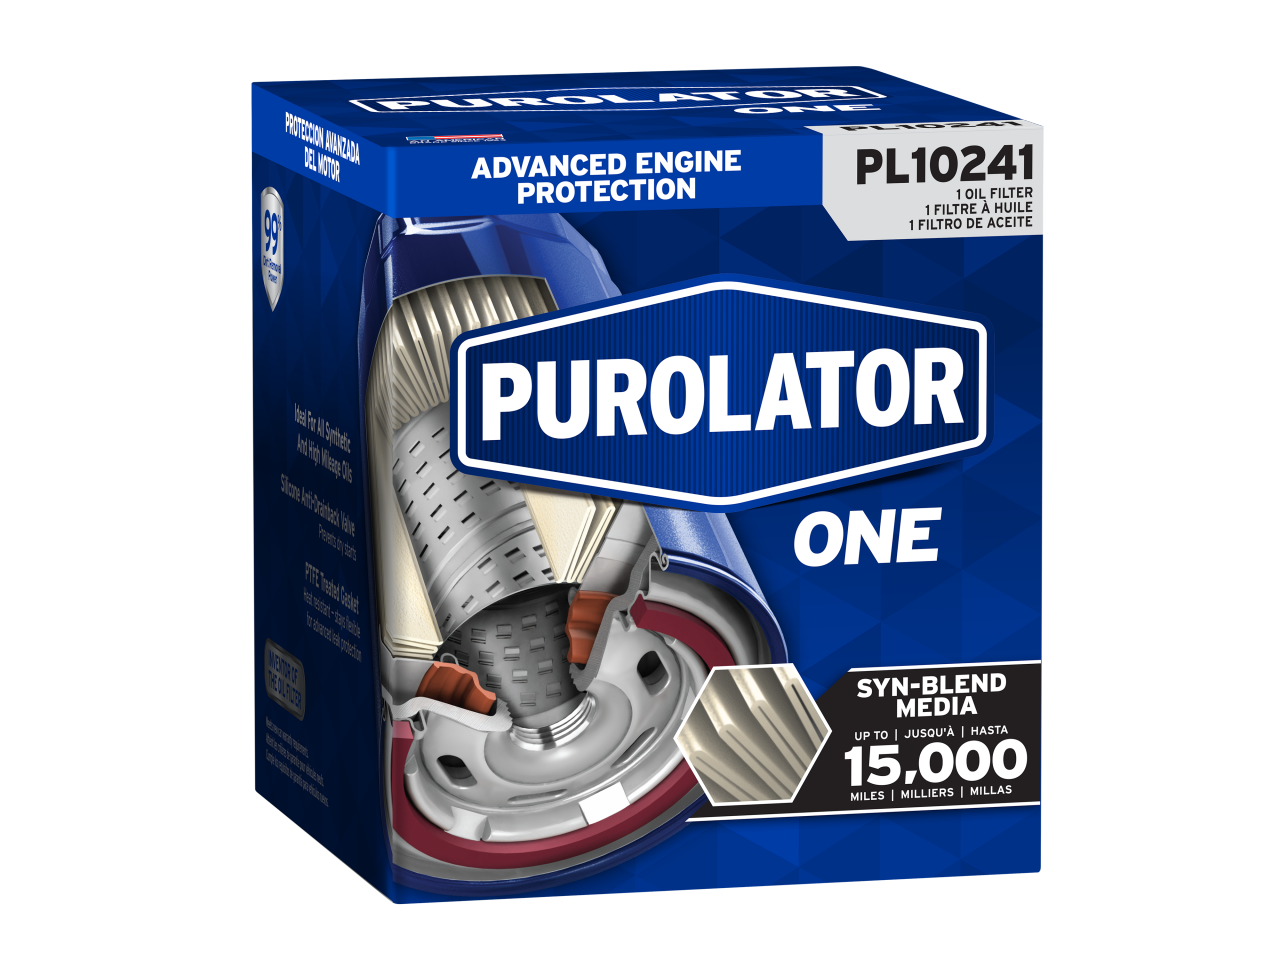 PurolatorONE Oil Filters keep engines operating at peak performance for up to 10,000 miles of advanced engine protection.